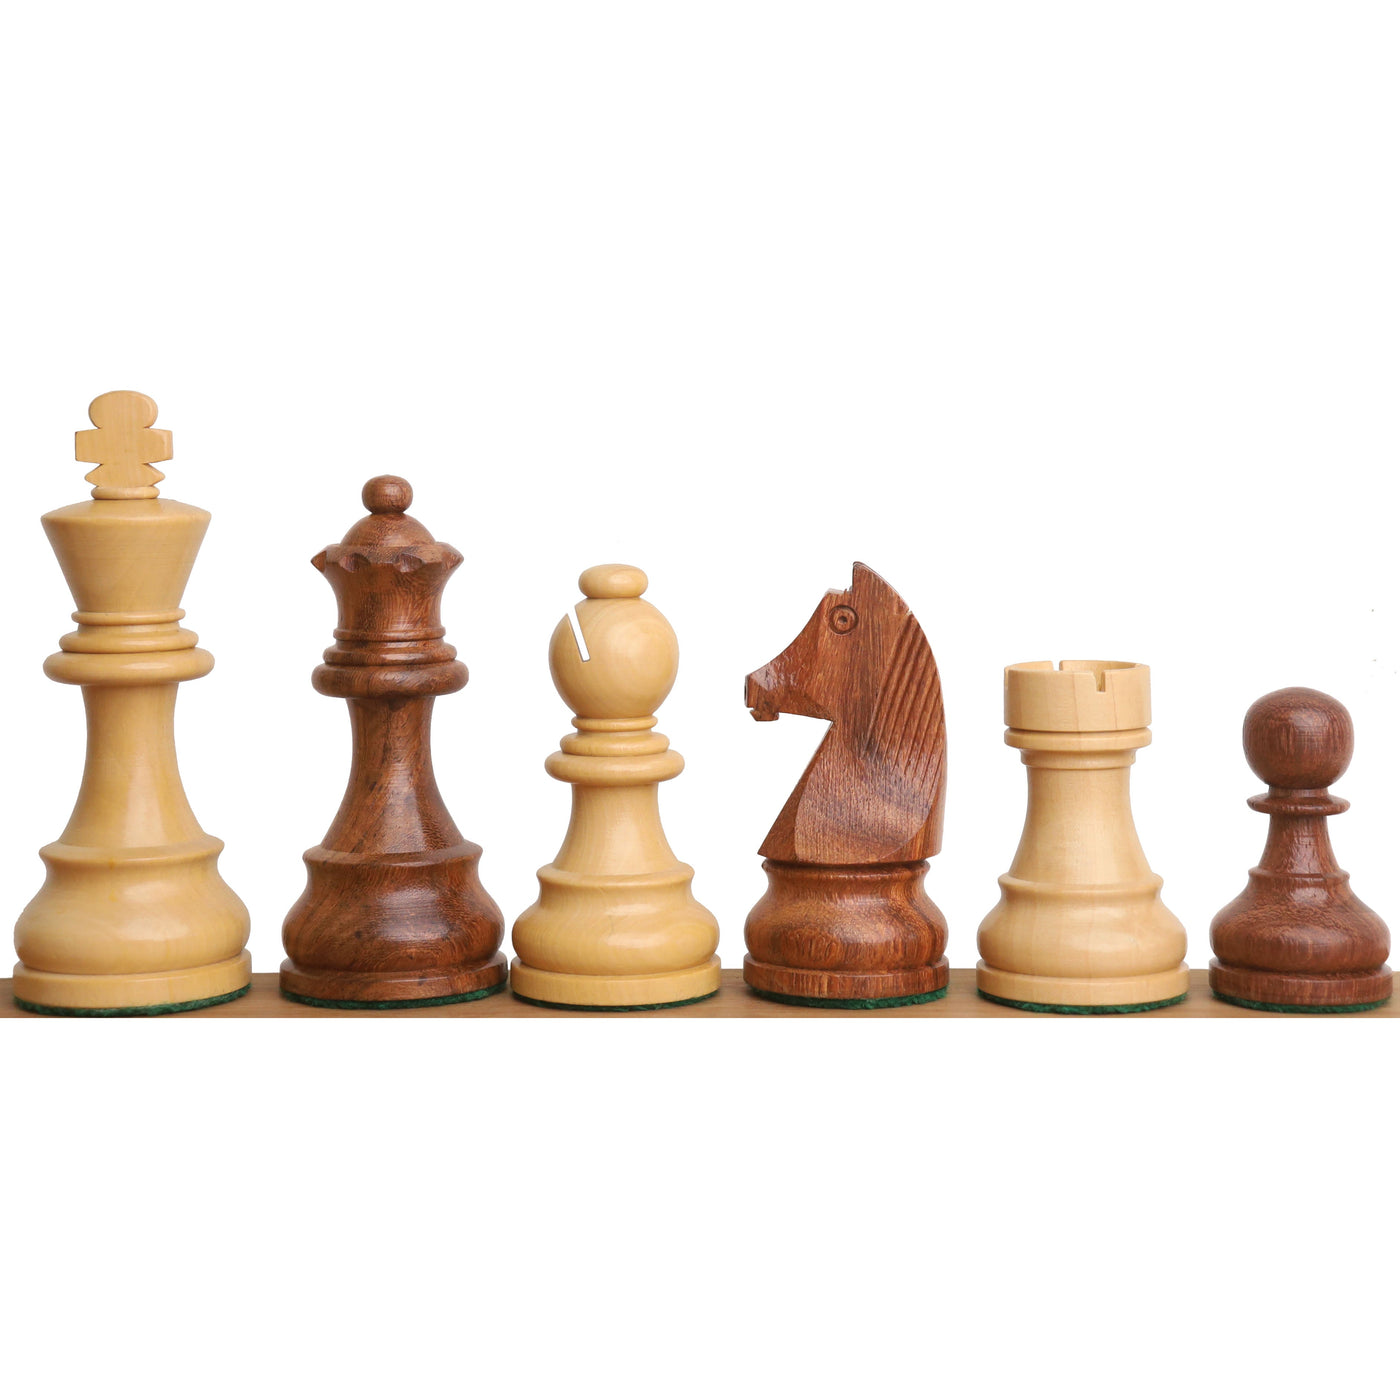 3.9" Tournament Wooden Chess Pieces Set with Chess Storage Box - Golden Rosewood